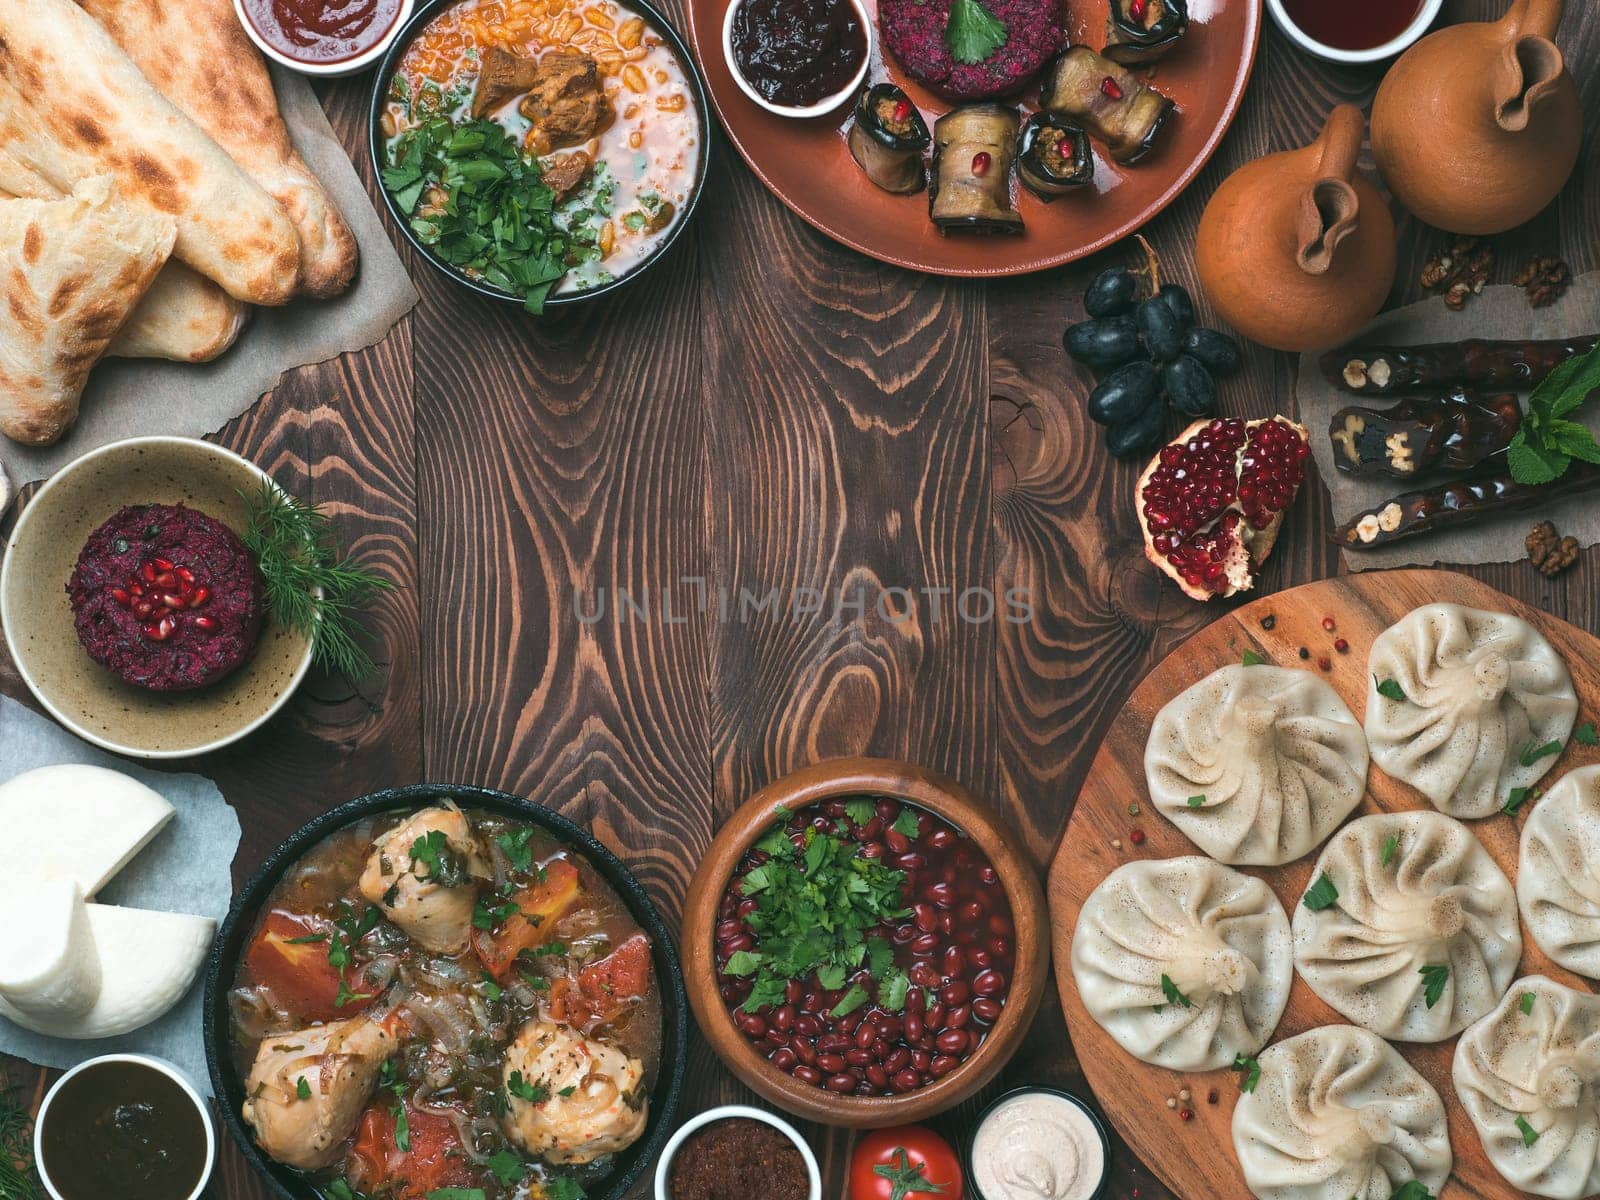 View from above of georgian cuisine on brown wooden table.Traditional georgian food-khinkali,kharcho,chahokhbili,phali,lobio and local sauces - tkemali, satsebeli, adzhika.Top view.Copy space for text